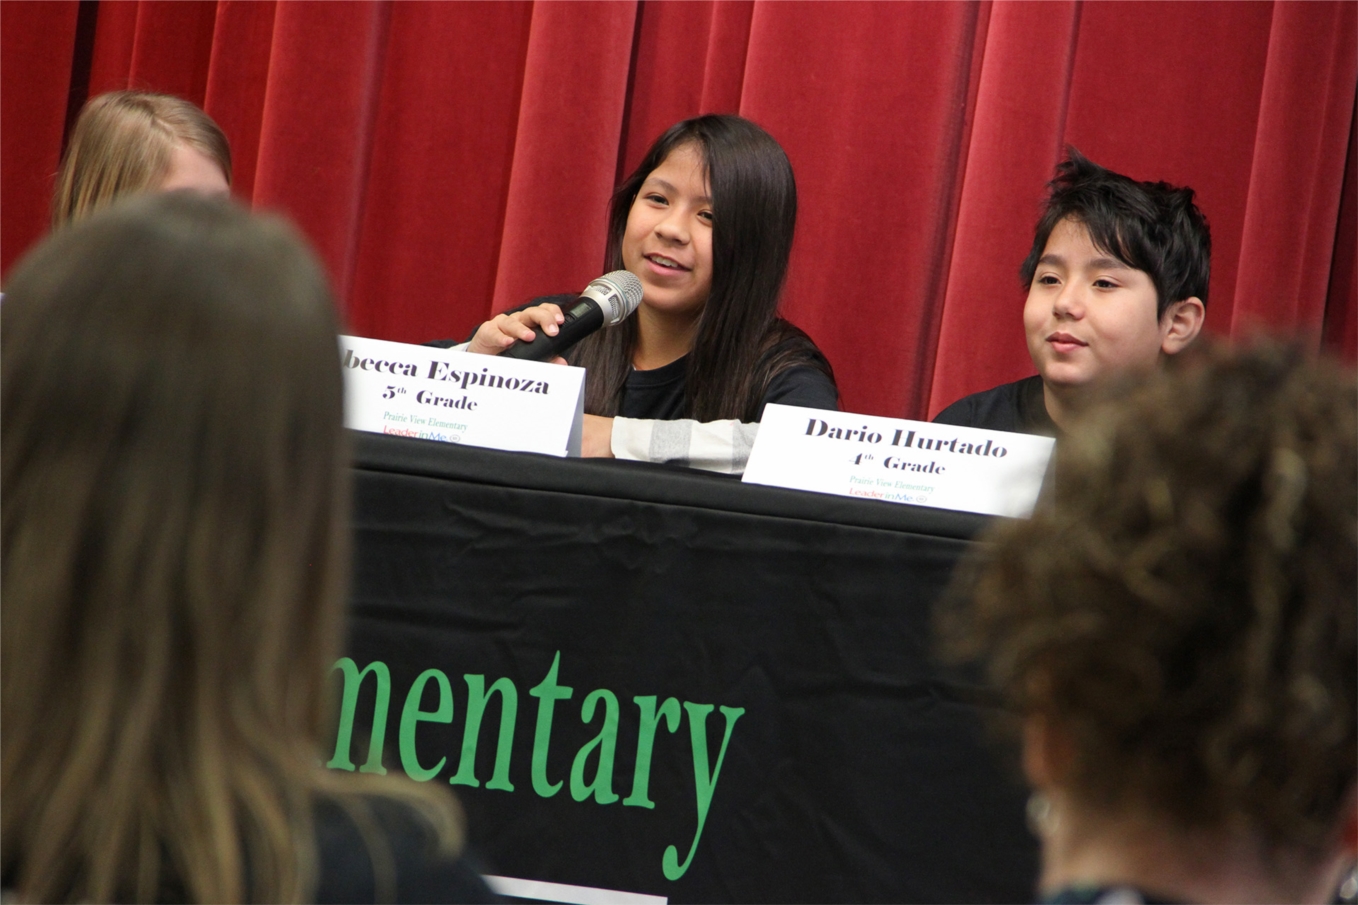 Seven Hills Elementary School students answer questions from educators across the region regarding their school’s leadership and social-emotional learning programs as part of The Leader in Me. The campus was designated a Lighthouse School for its implementation of the character-building program.